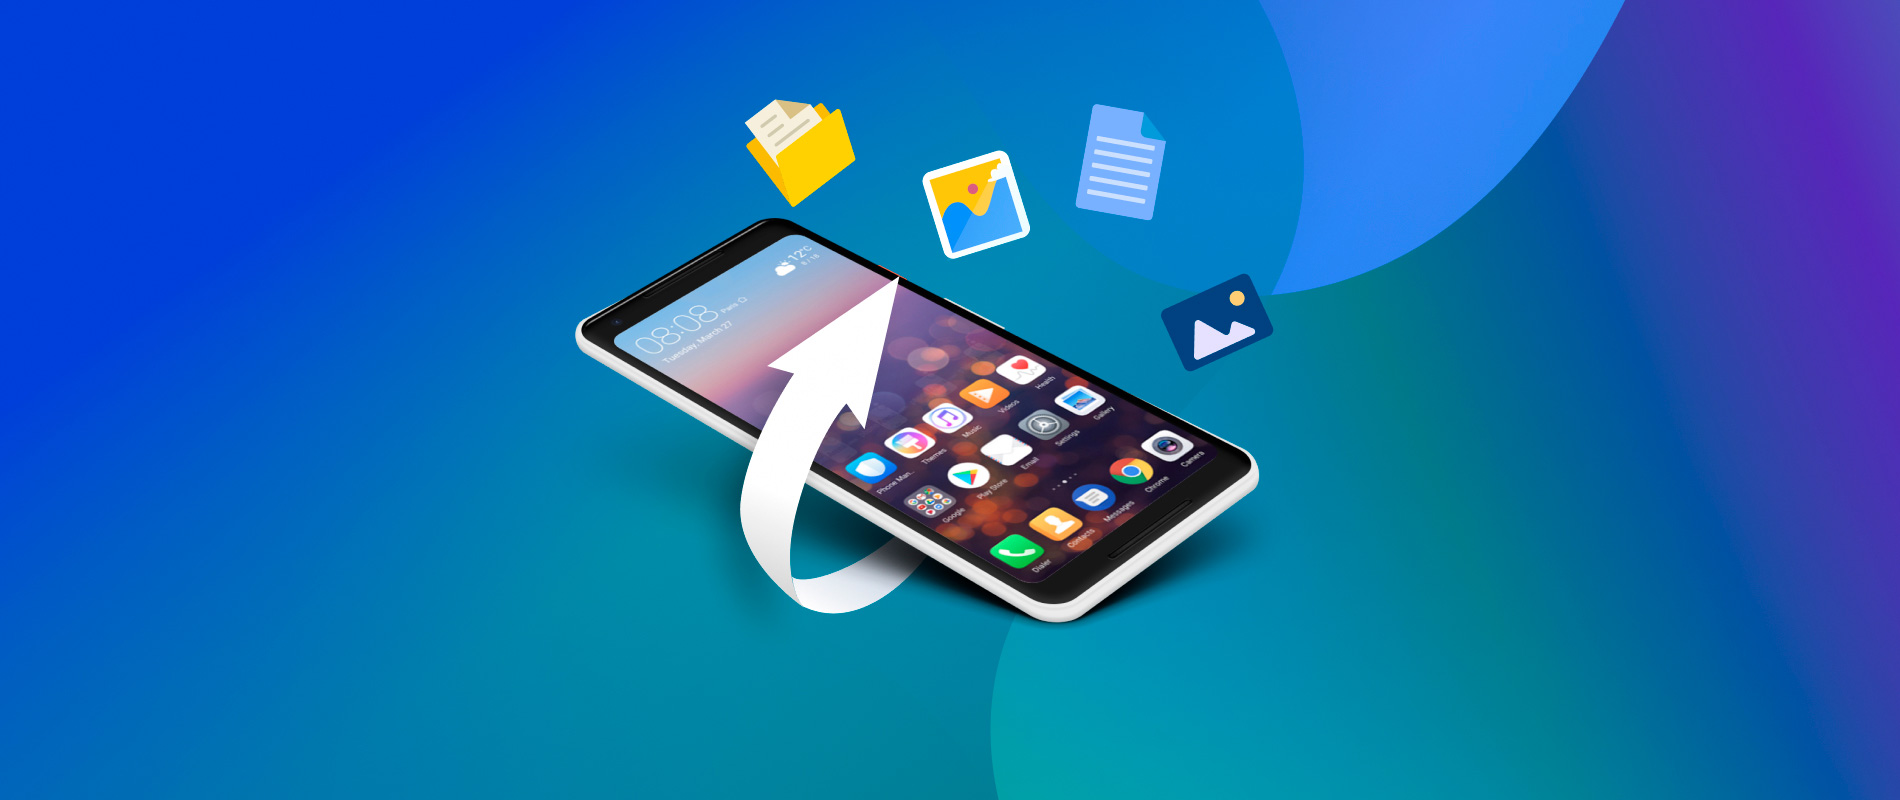 Ultimate Guide How to Recover Deleted Files on Android